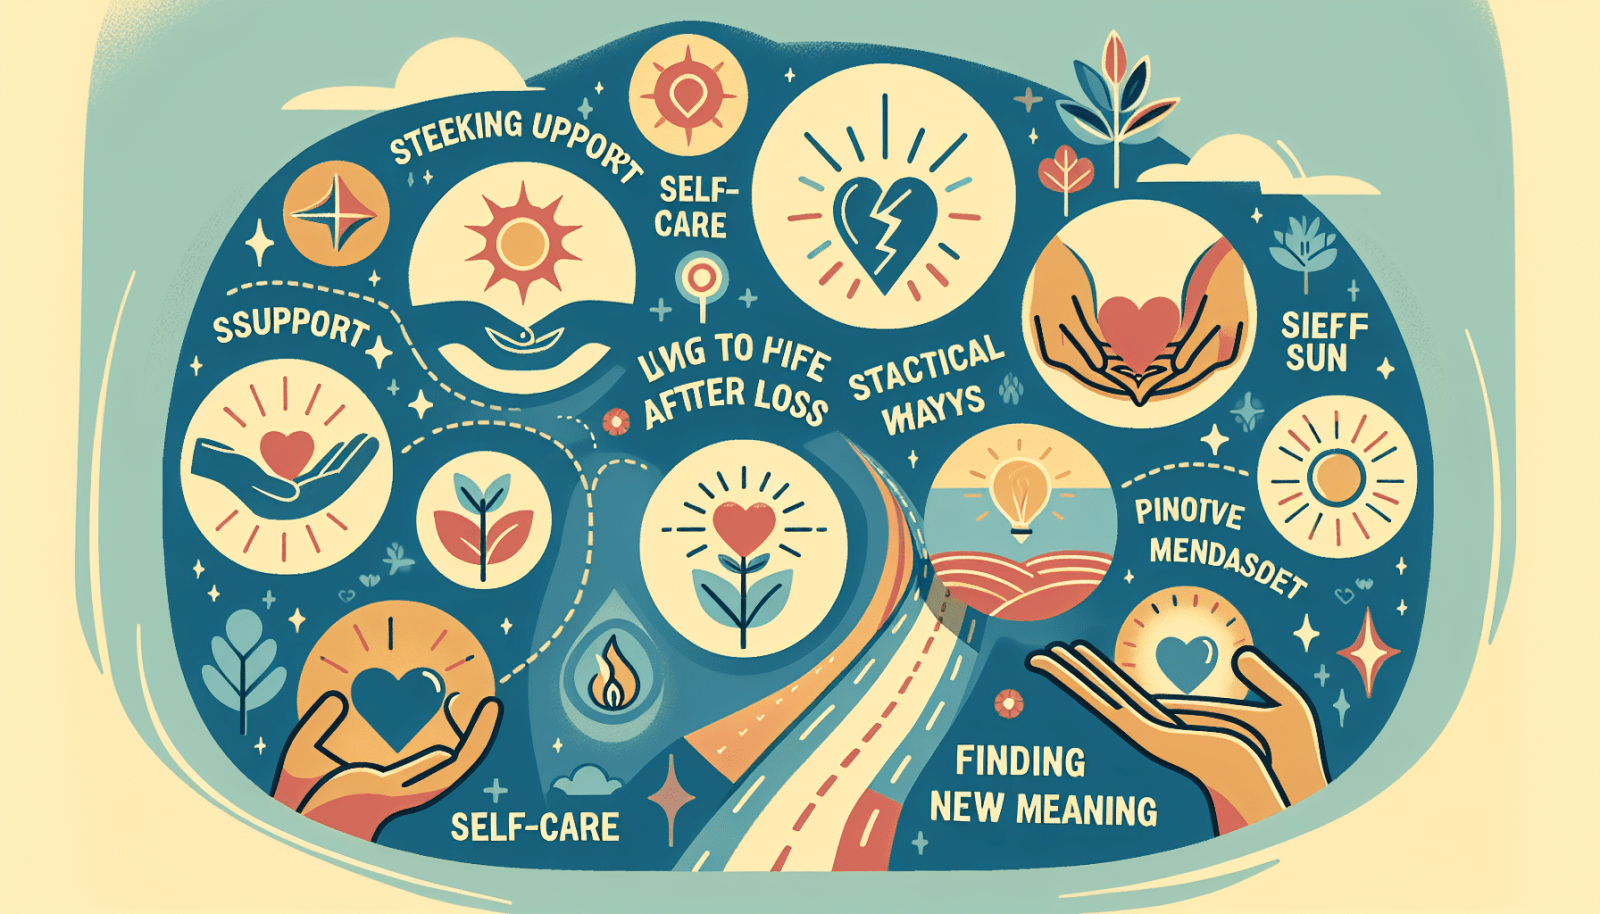 Infographic with a circular flow depicting self-care and coping strategies, with sections labeled "SUPPORT," "SELF-CARE," "LIVING TO LIFE AFTER LOSS," "TACTICAL WAYS," "FINDING NEW MEANING," along with related icons like a compass, heart, sun, and plants, set against a blue background. Some text is misspelled, such as "SIEFF SUN" and "PINOTVE MENDASOET."